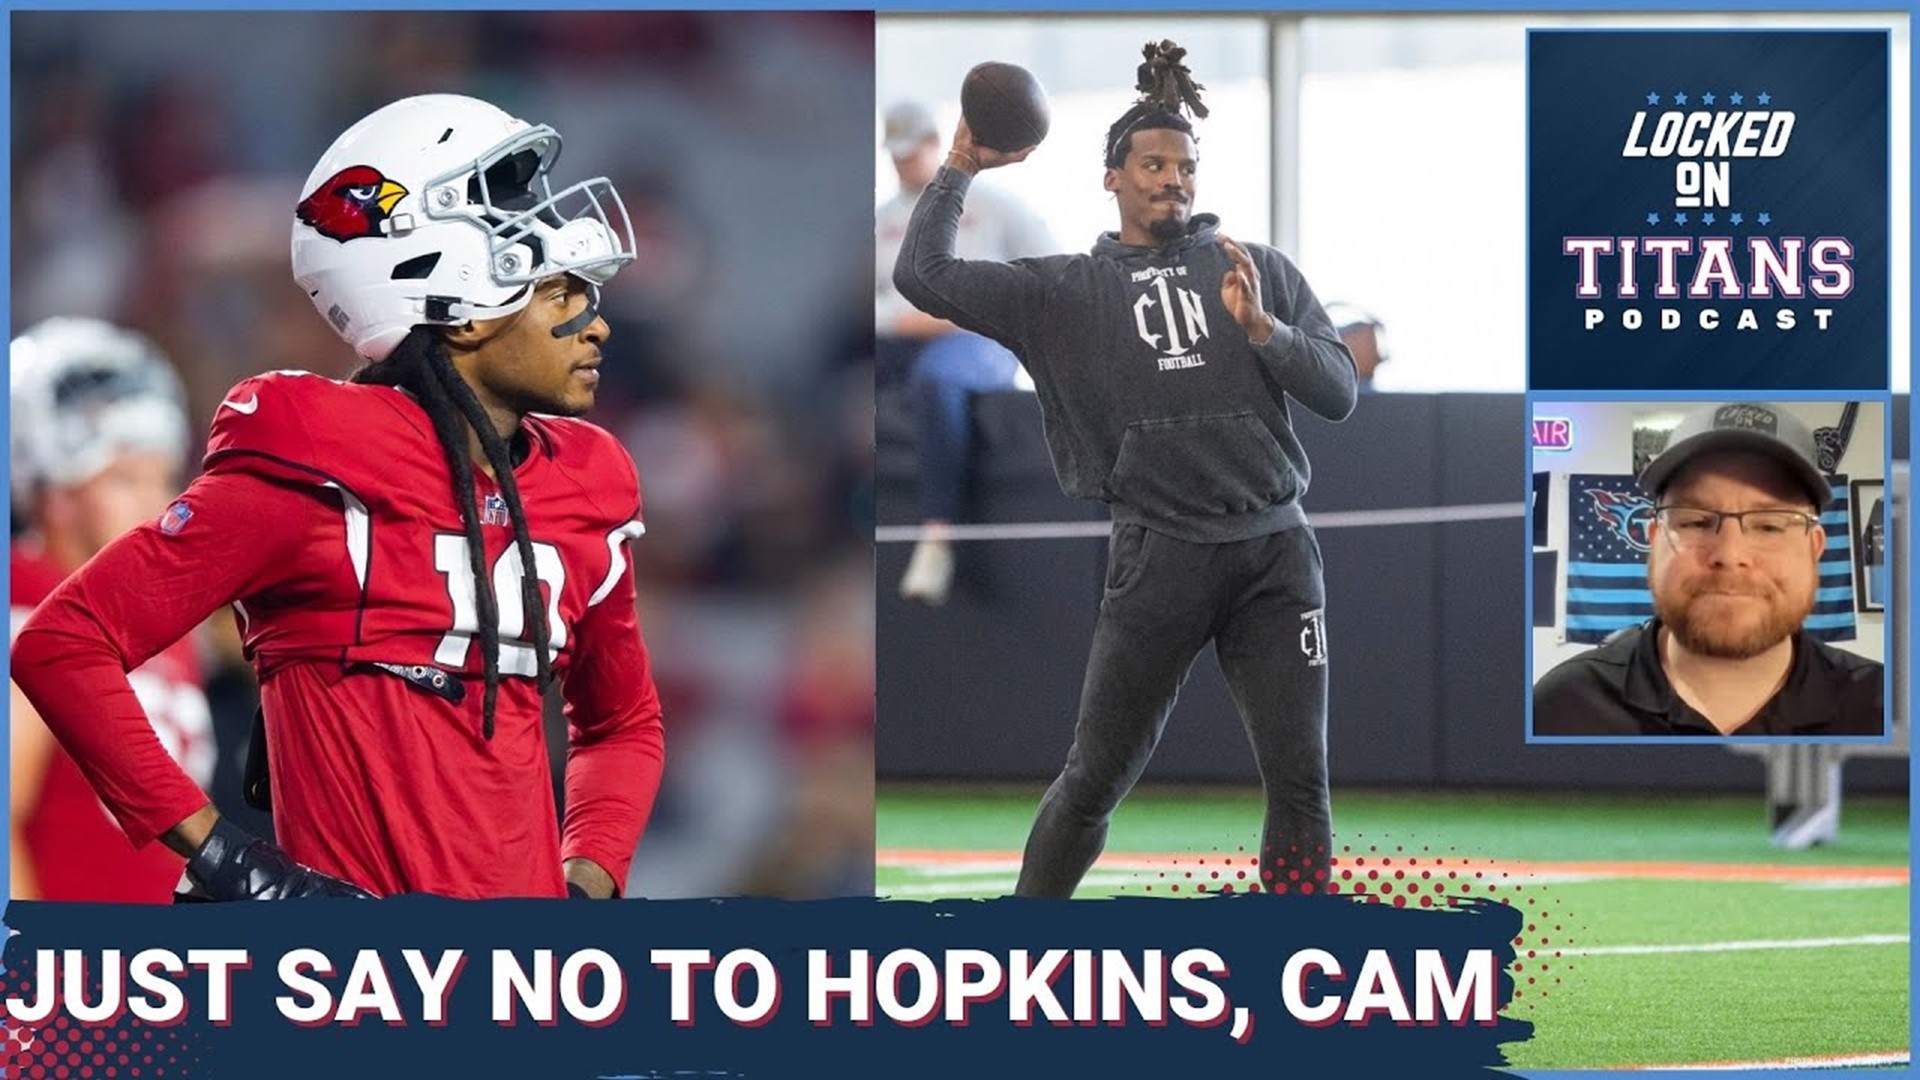 The Tennessee Titans were named as a team interested in DeAndre Hopkins in a report on Tuesday. While it sounds enticing, the Titans SHOULD NOT be interested